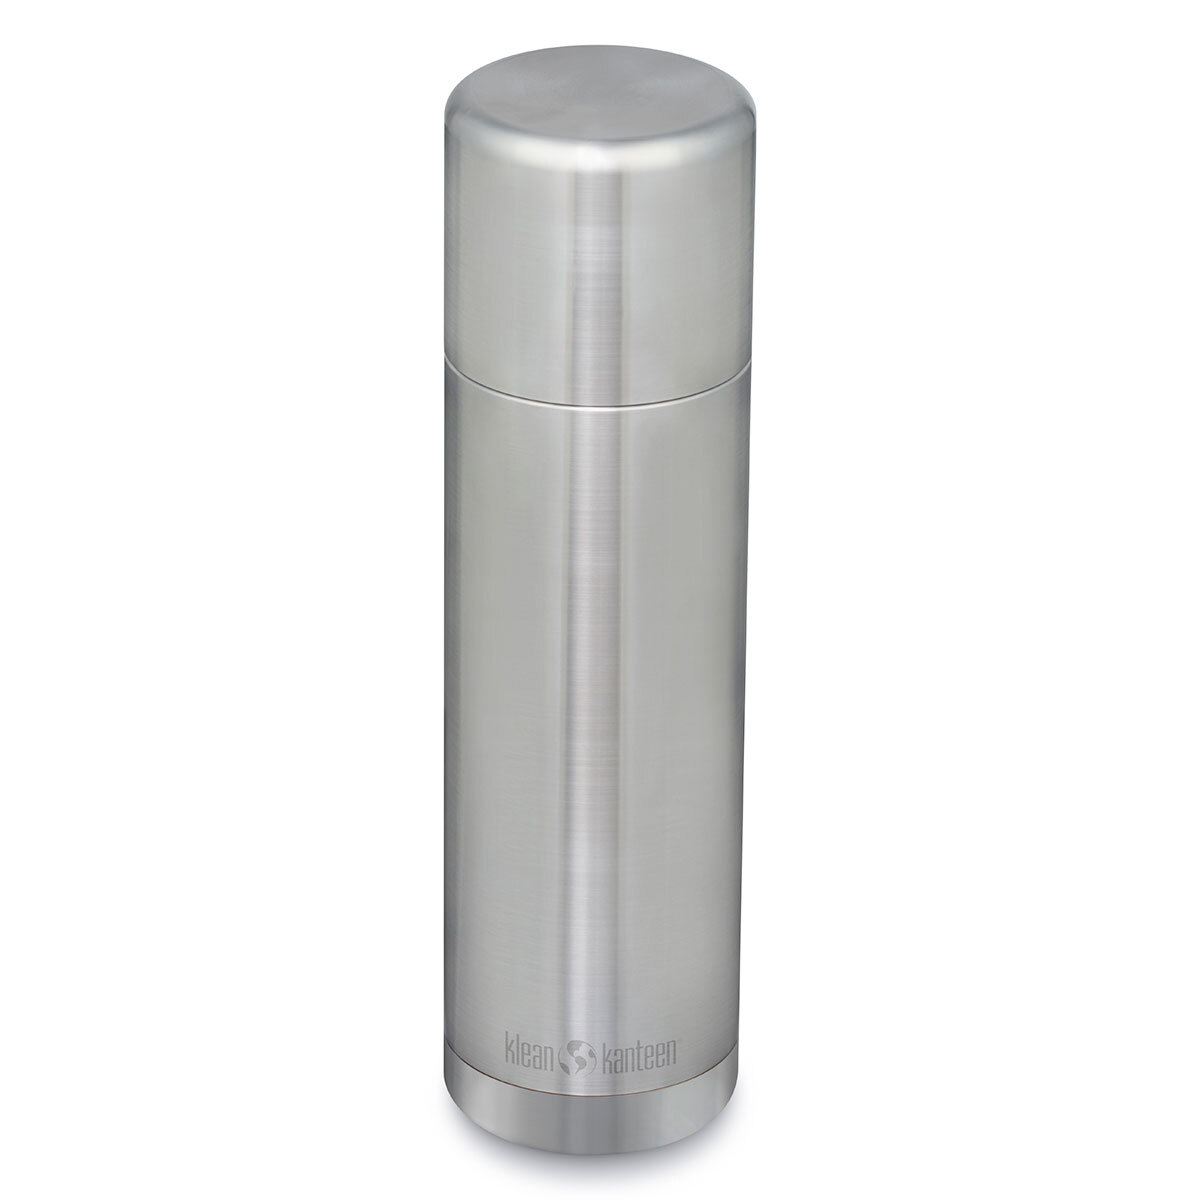 KLEAN KANTEEN TKPRO 1L THERMAL INSULATED BOTTLE - STAINLESS STEEL